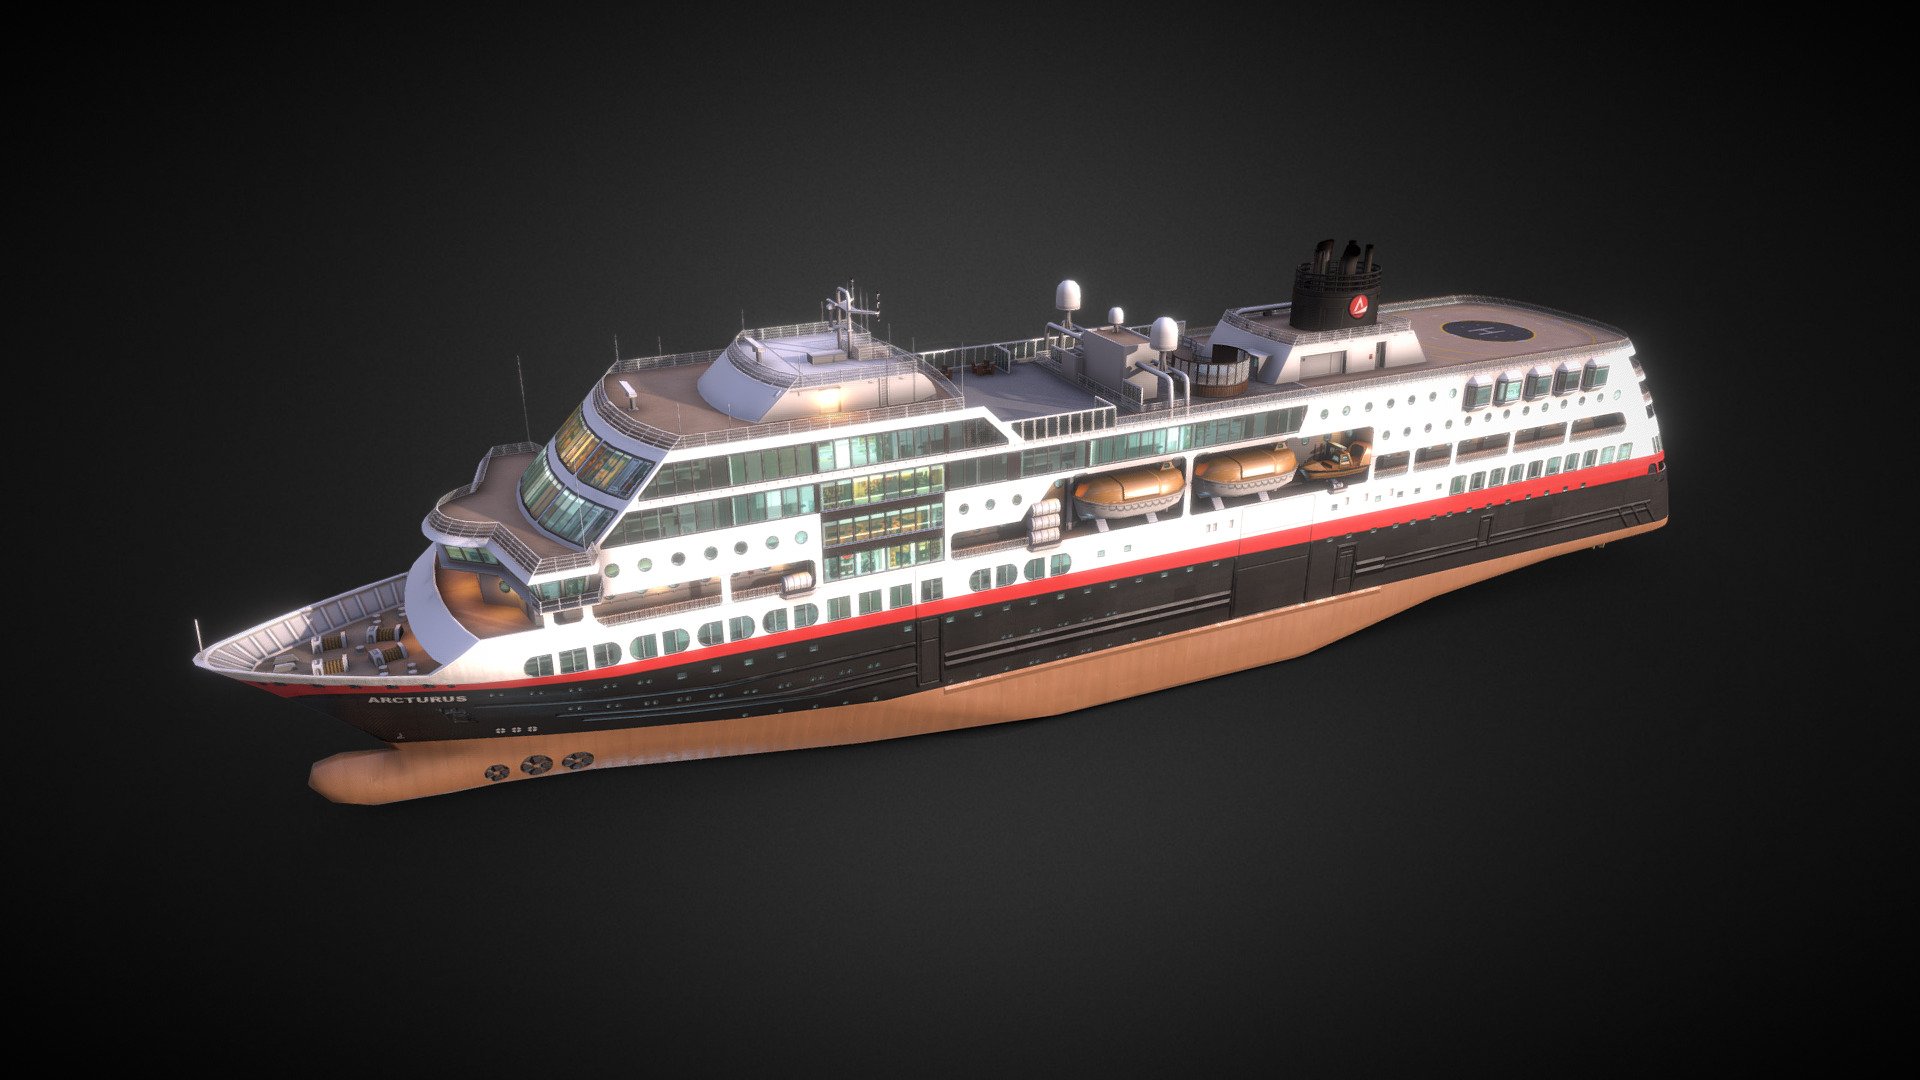 Low-poly  super lightweight model inspired by MS Midnatsol. It's a coastal line cruiseferry / cruiseship 3d model